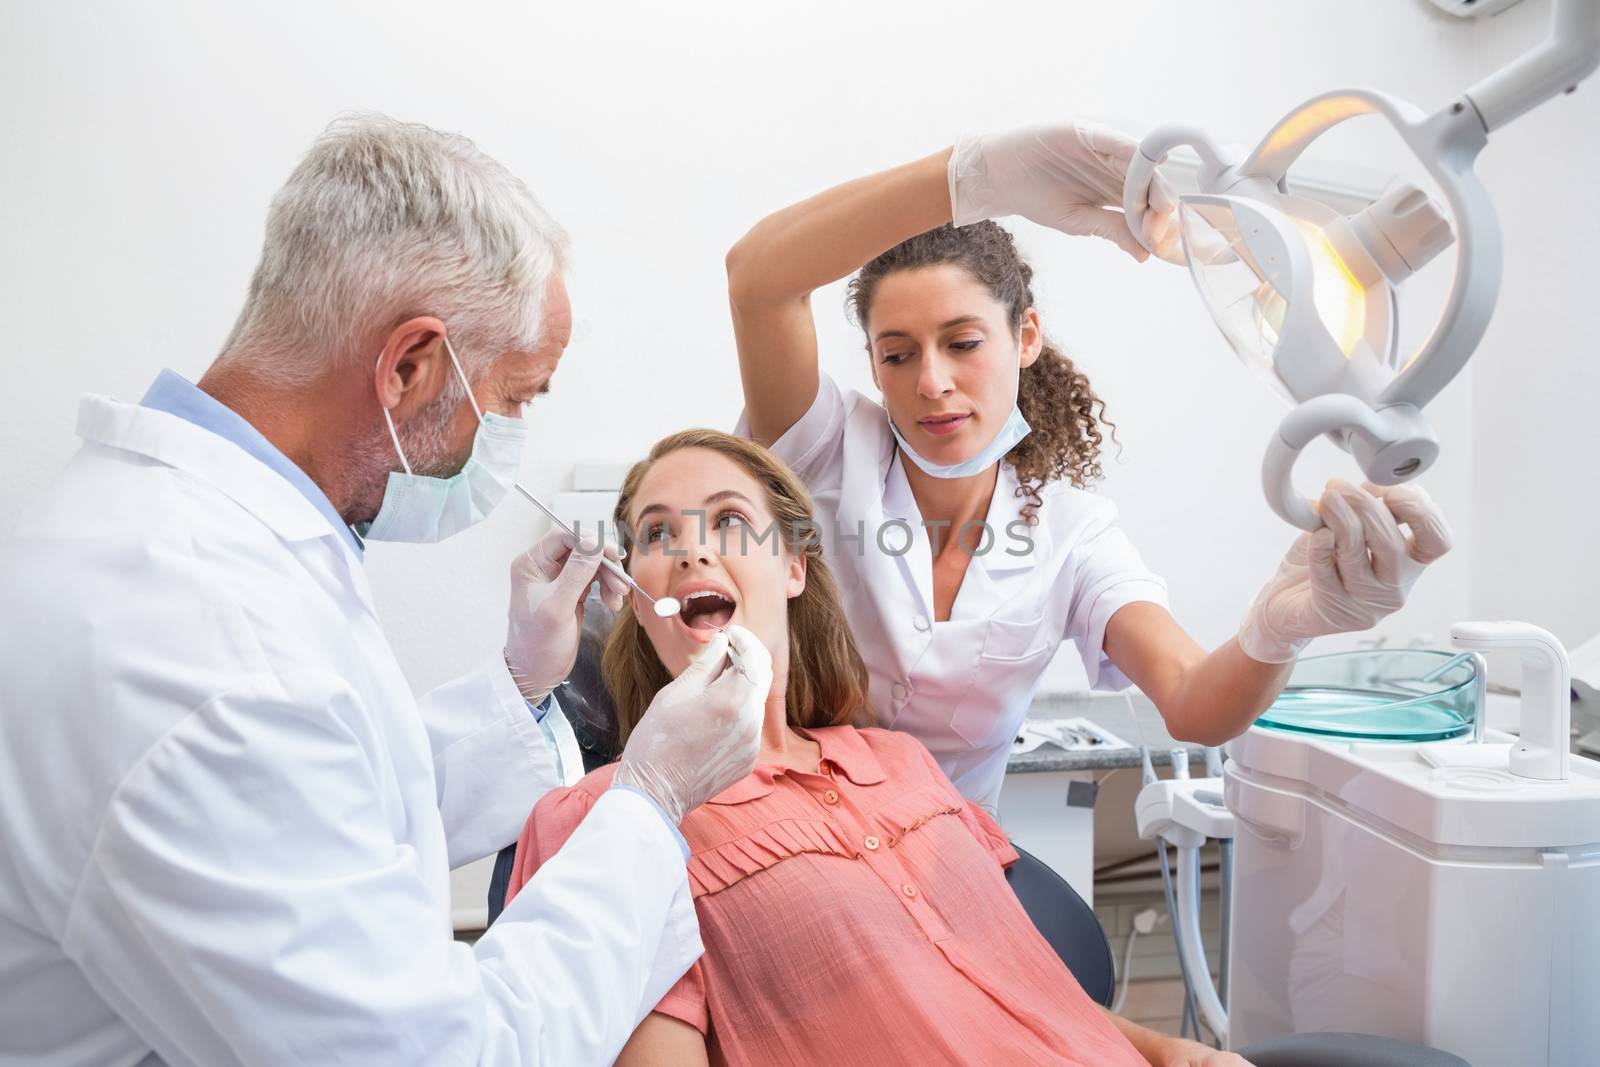 Dentist examining a patients teeth in the dentists chair with assistant by Wavebreakmedia